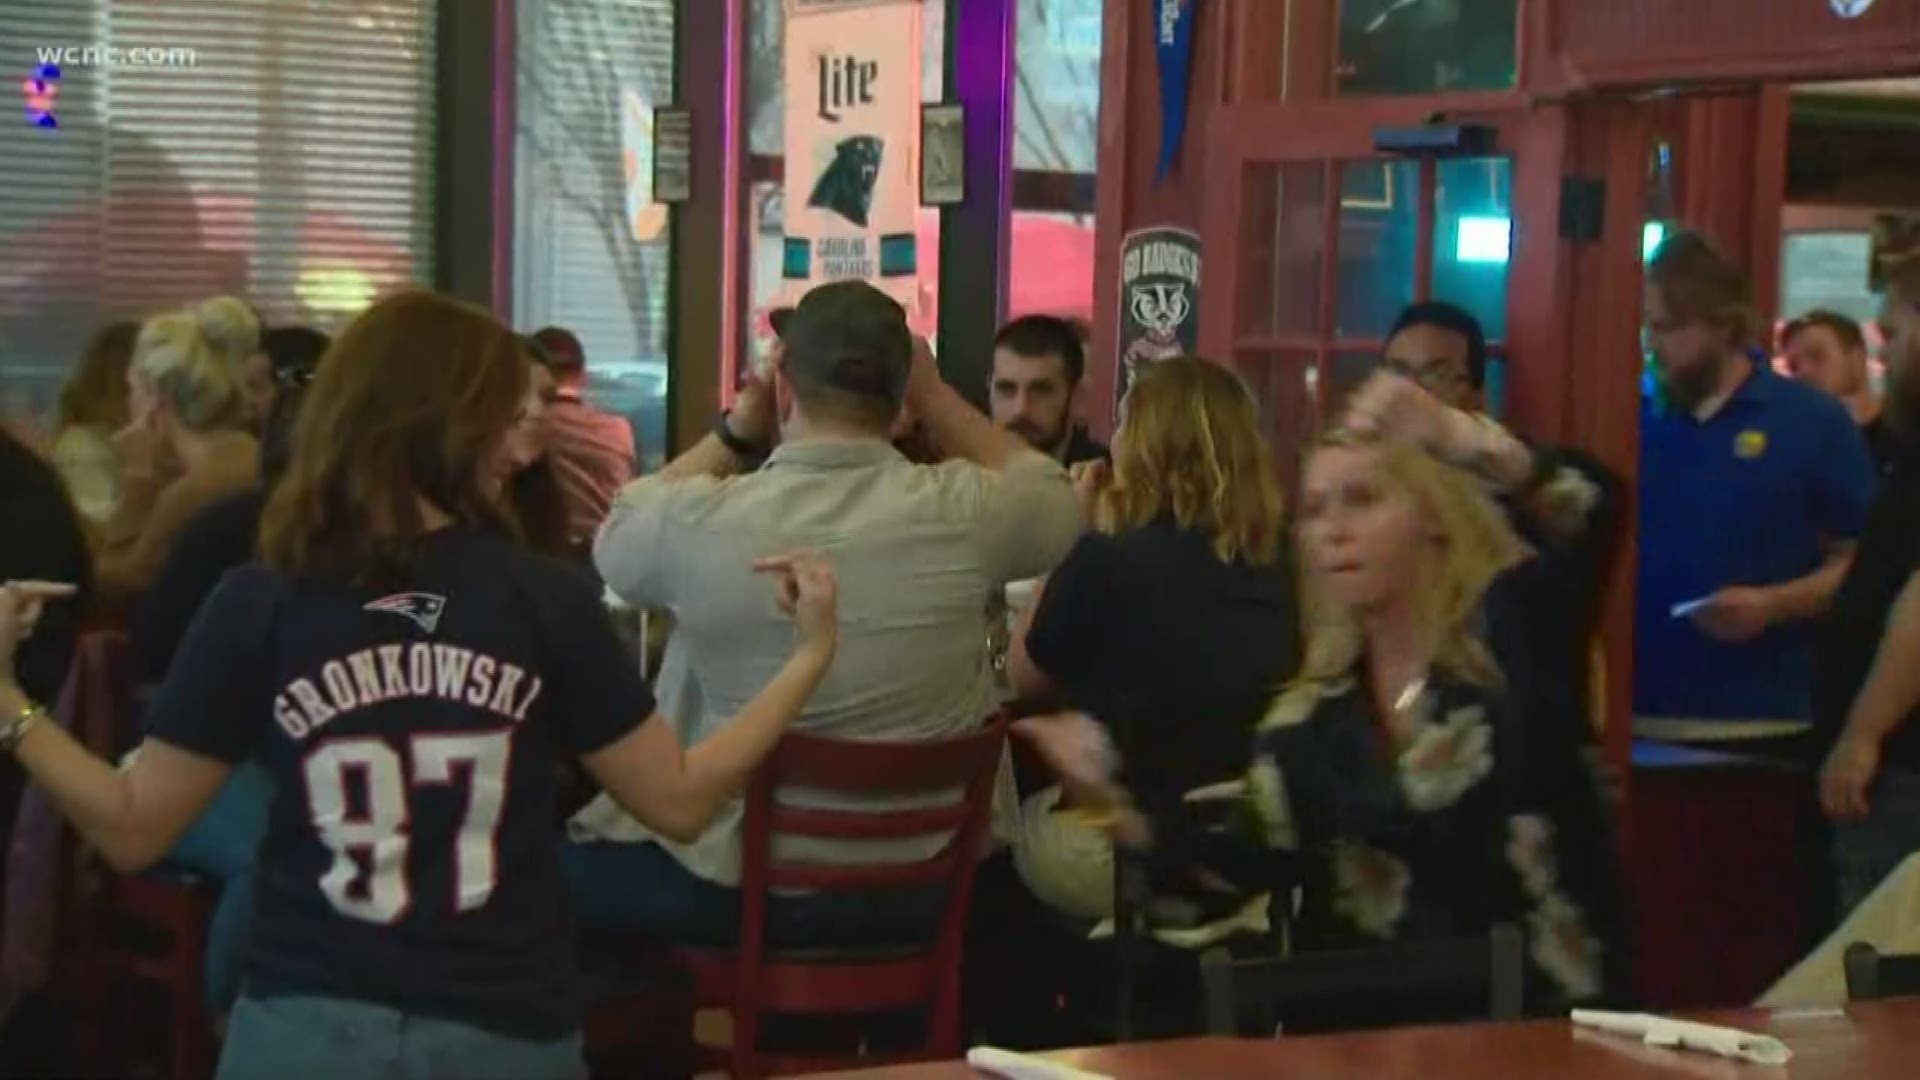 Among the hot spots of Charlotte, Dilworth Neighborhood Grille has been referred to as one of the best sports bars to watch the Super Bowl.